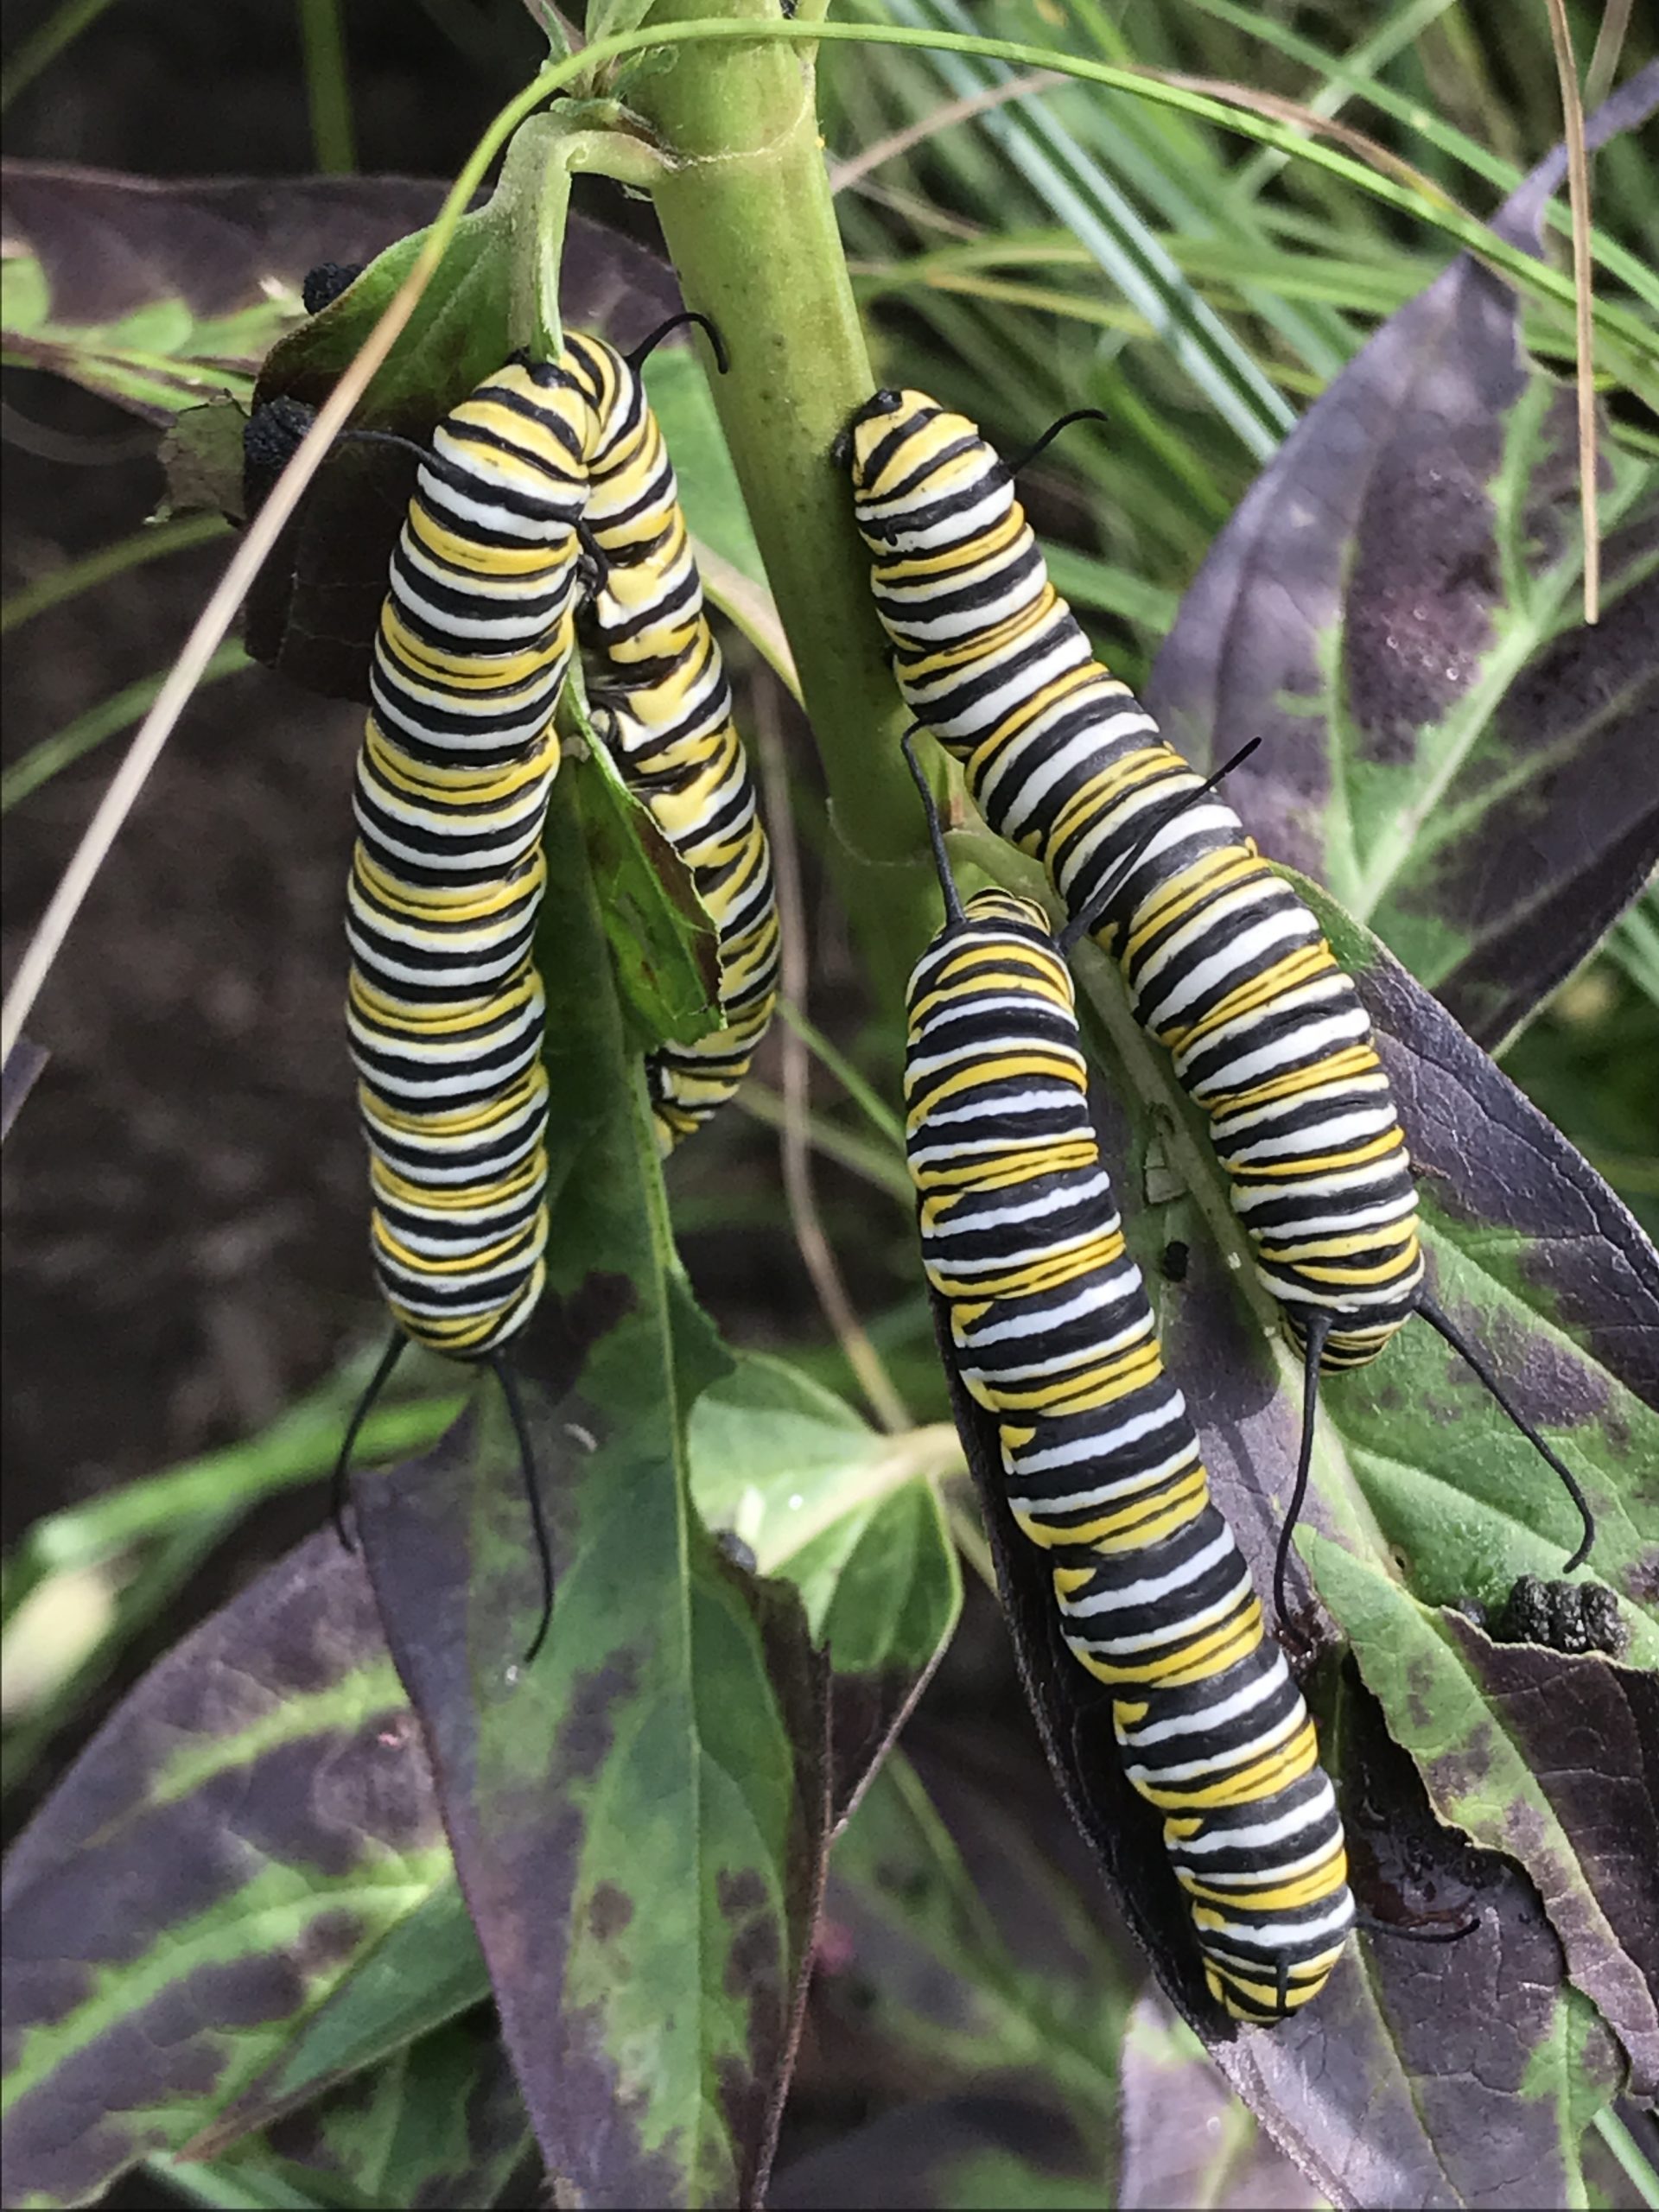 Monarch butterfly caterpillars can only eat plants in the genus Asclepias, like common milkweed and swamp milkweed.